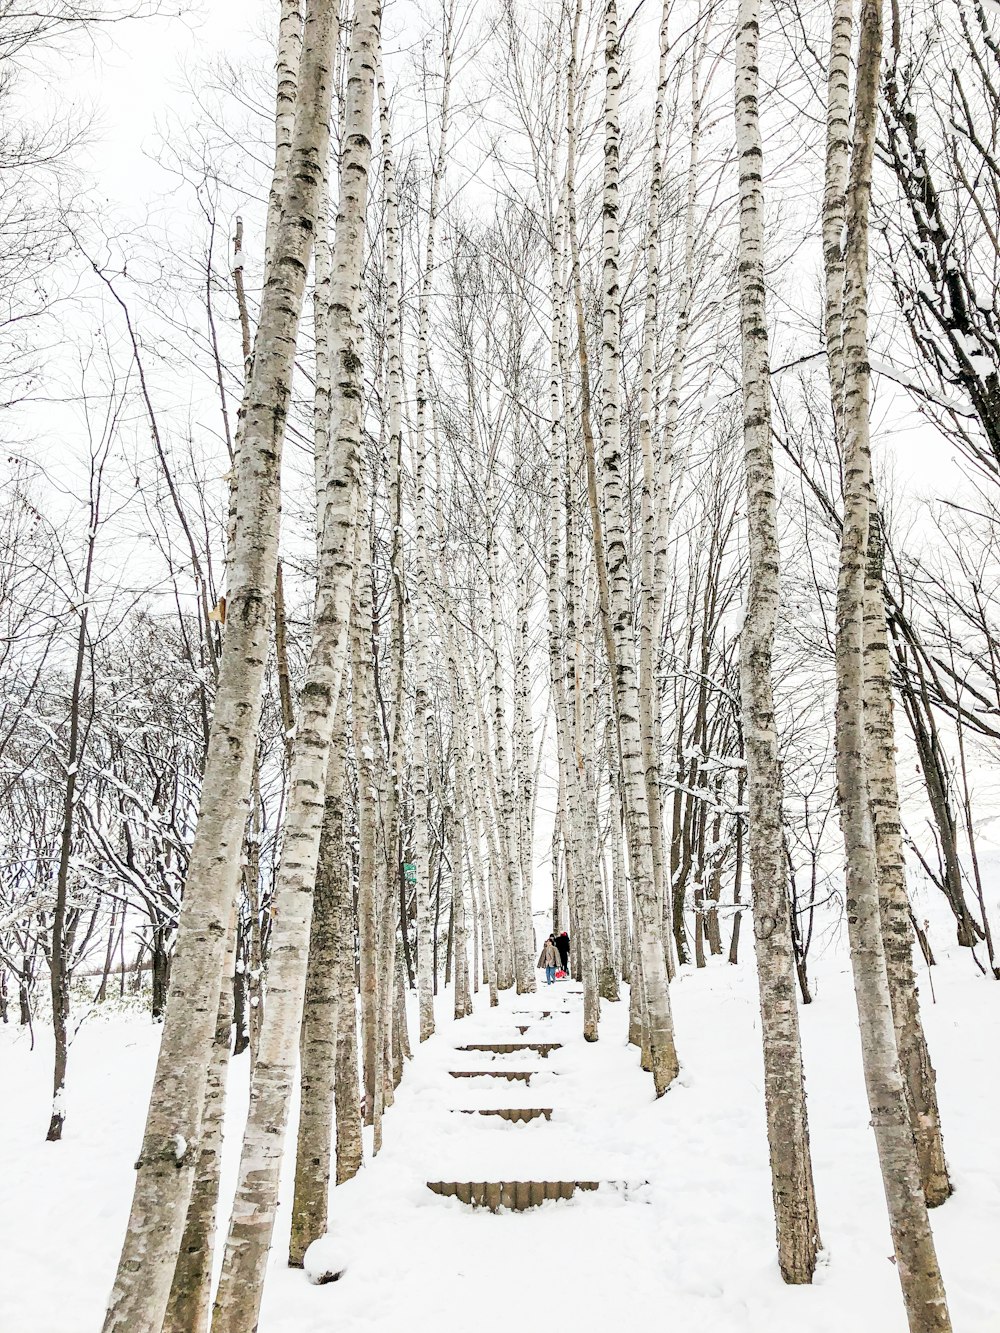 people walking on snow covered pathway between bare trees during daytime